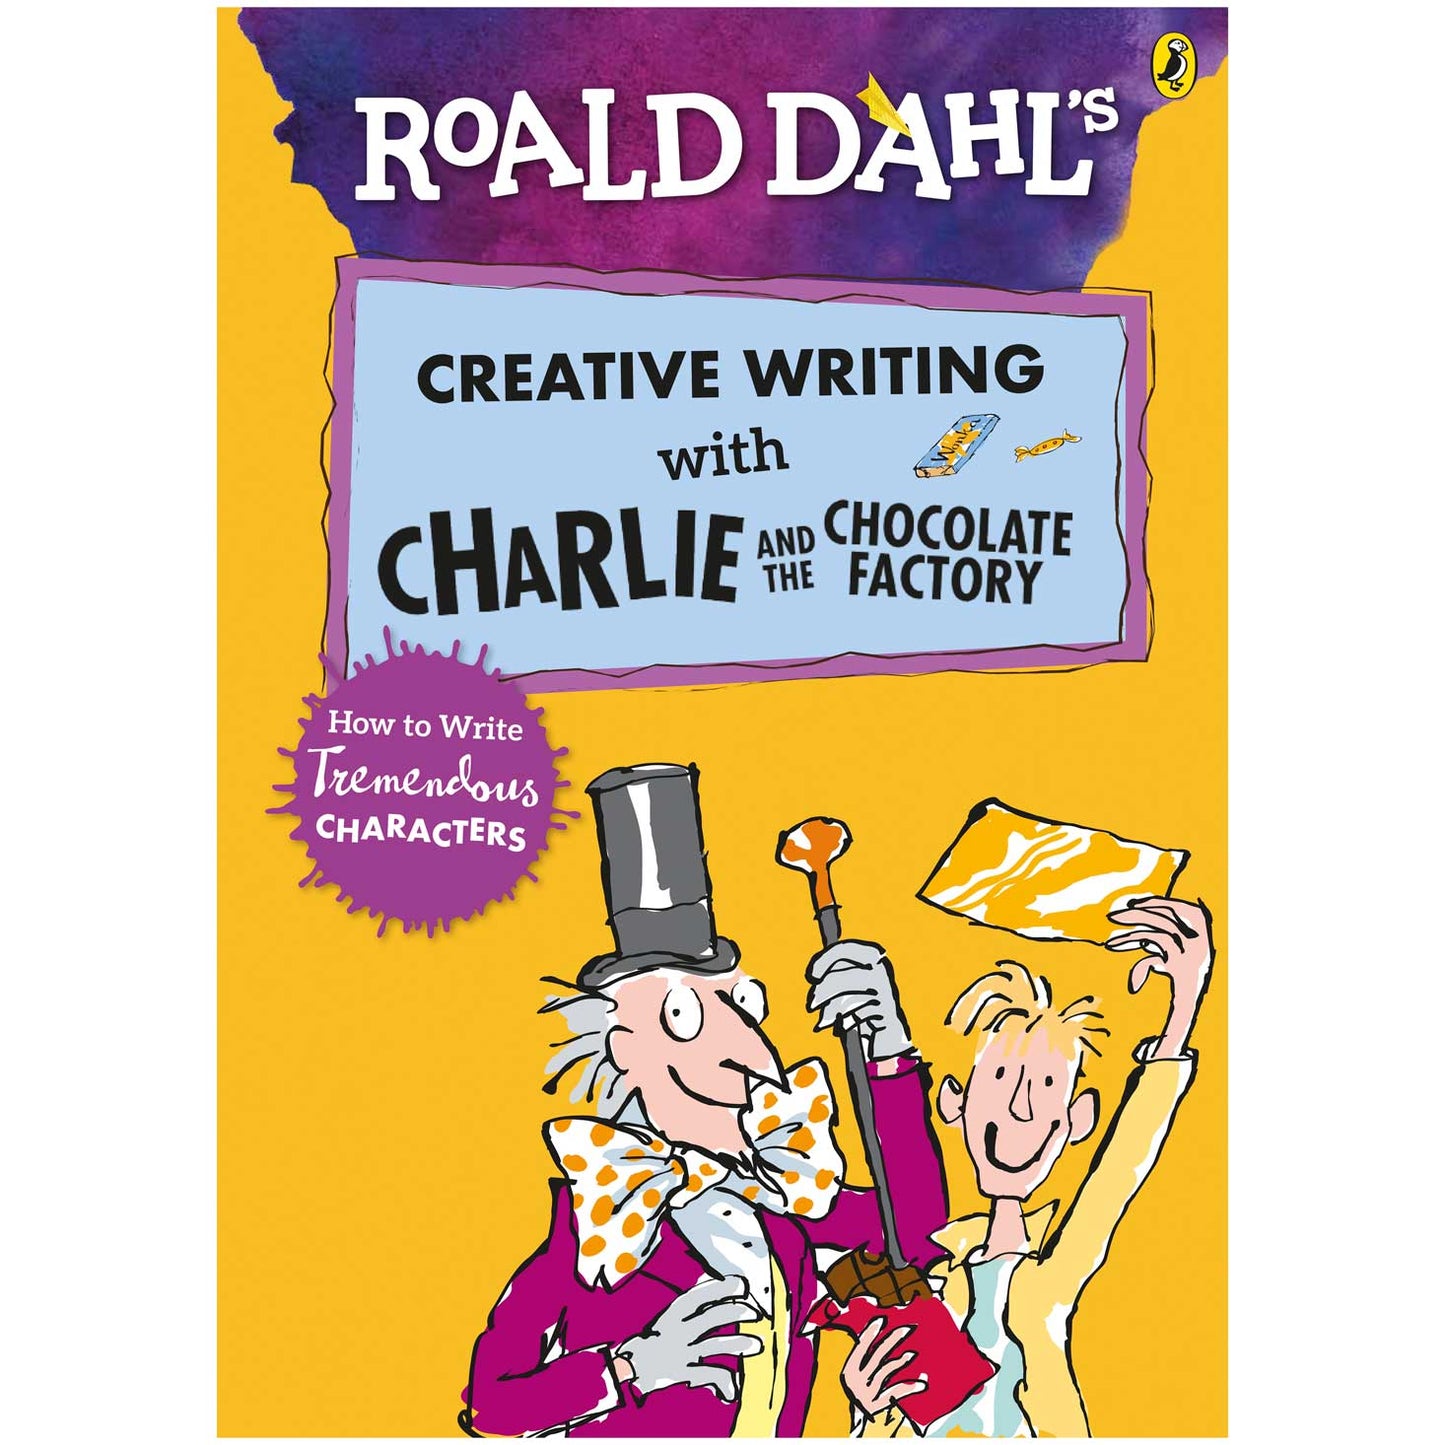 Creative Writing with Charlie and the Chocolate Factory based on Roald Dahl with illustrations by Quentin Blake